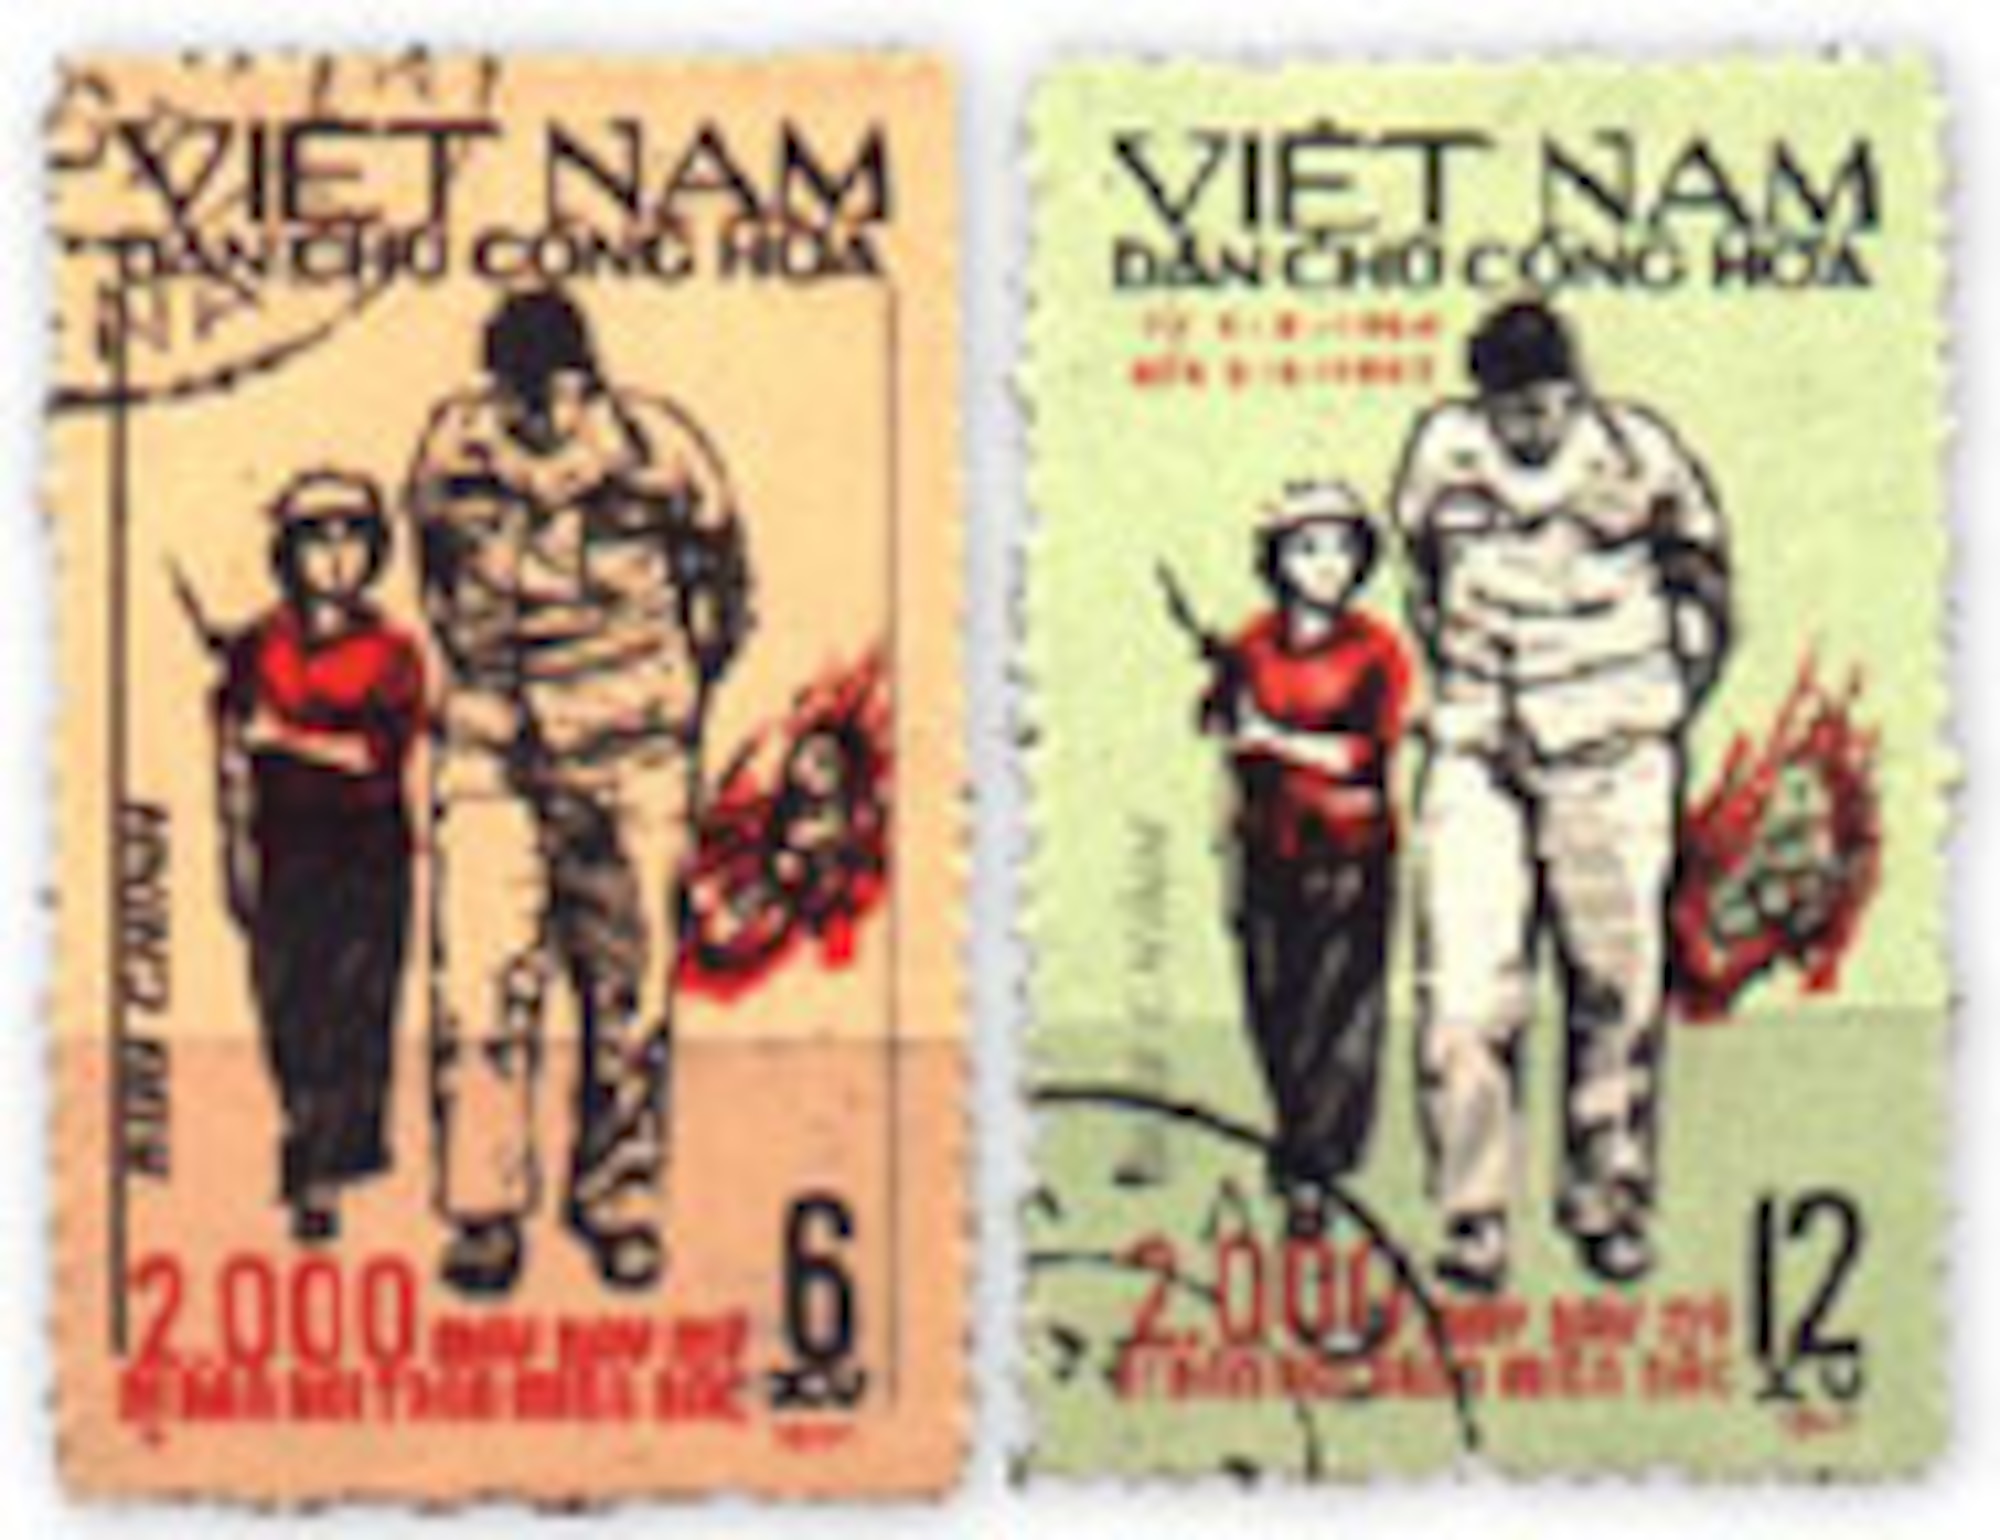 Vietnamese stamps portraying the capture of then Airman First Class Bill Robinson.